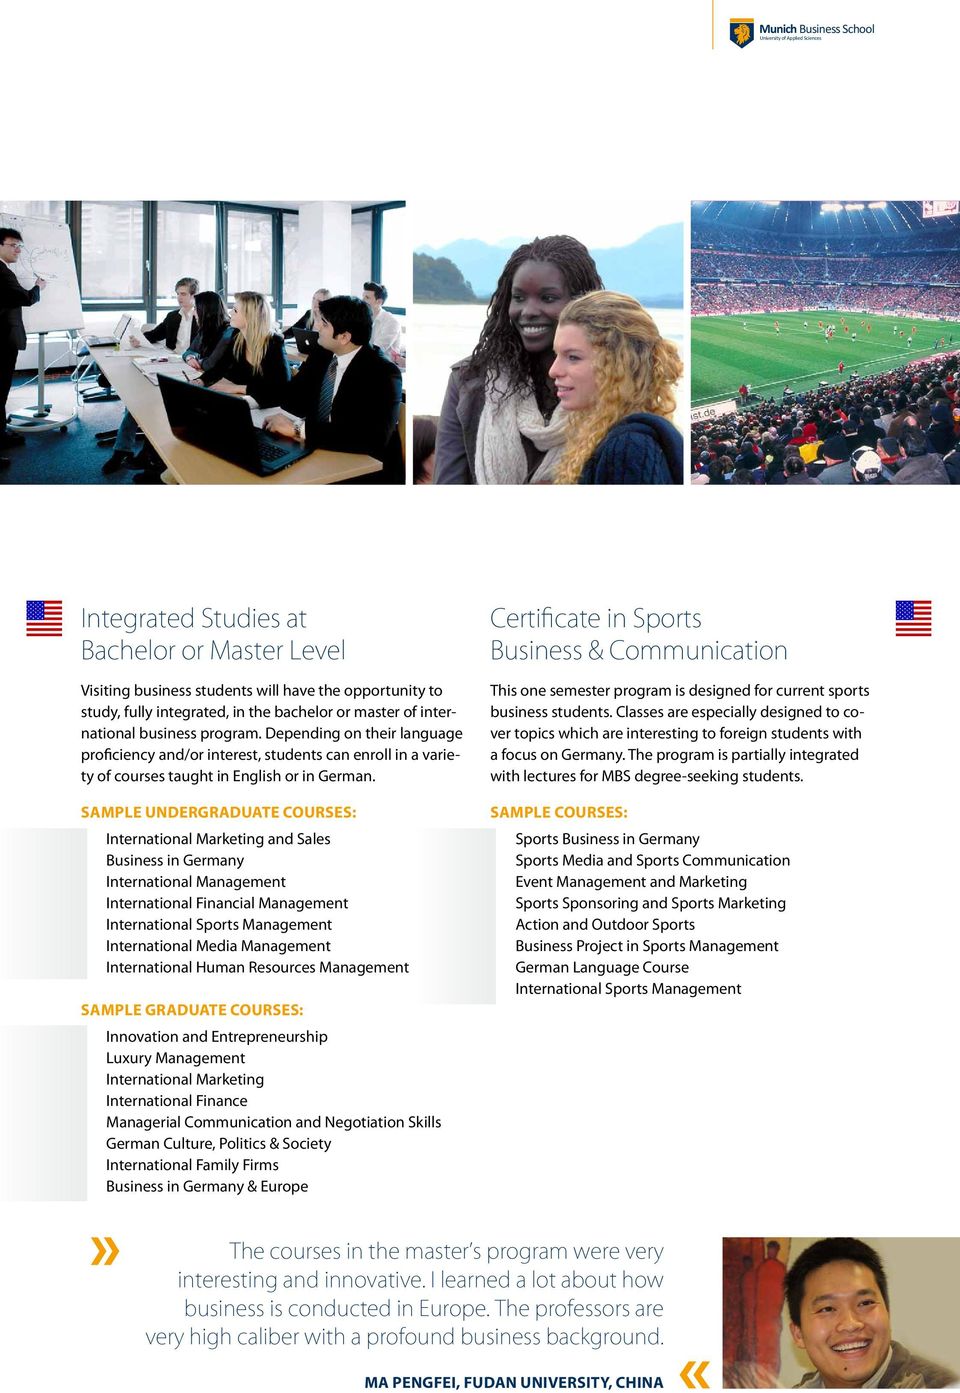 Sample undergraduate Courses: International Marketing and Sales Business in Germany International Management International Financial Management International Sports Management International Media